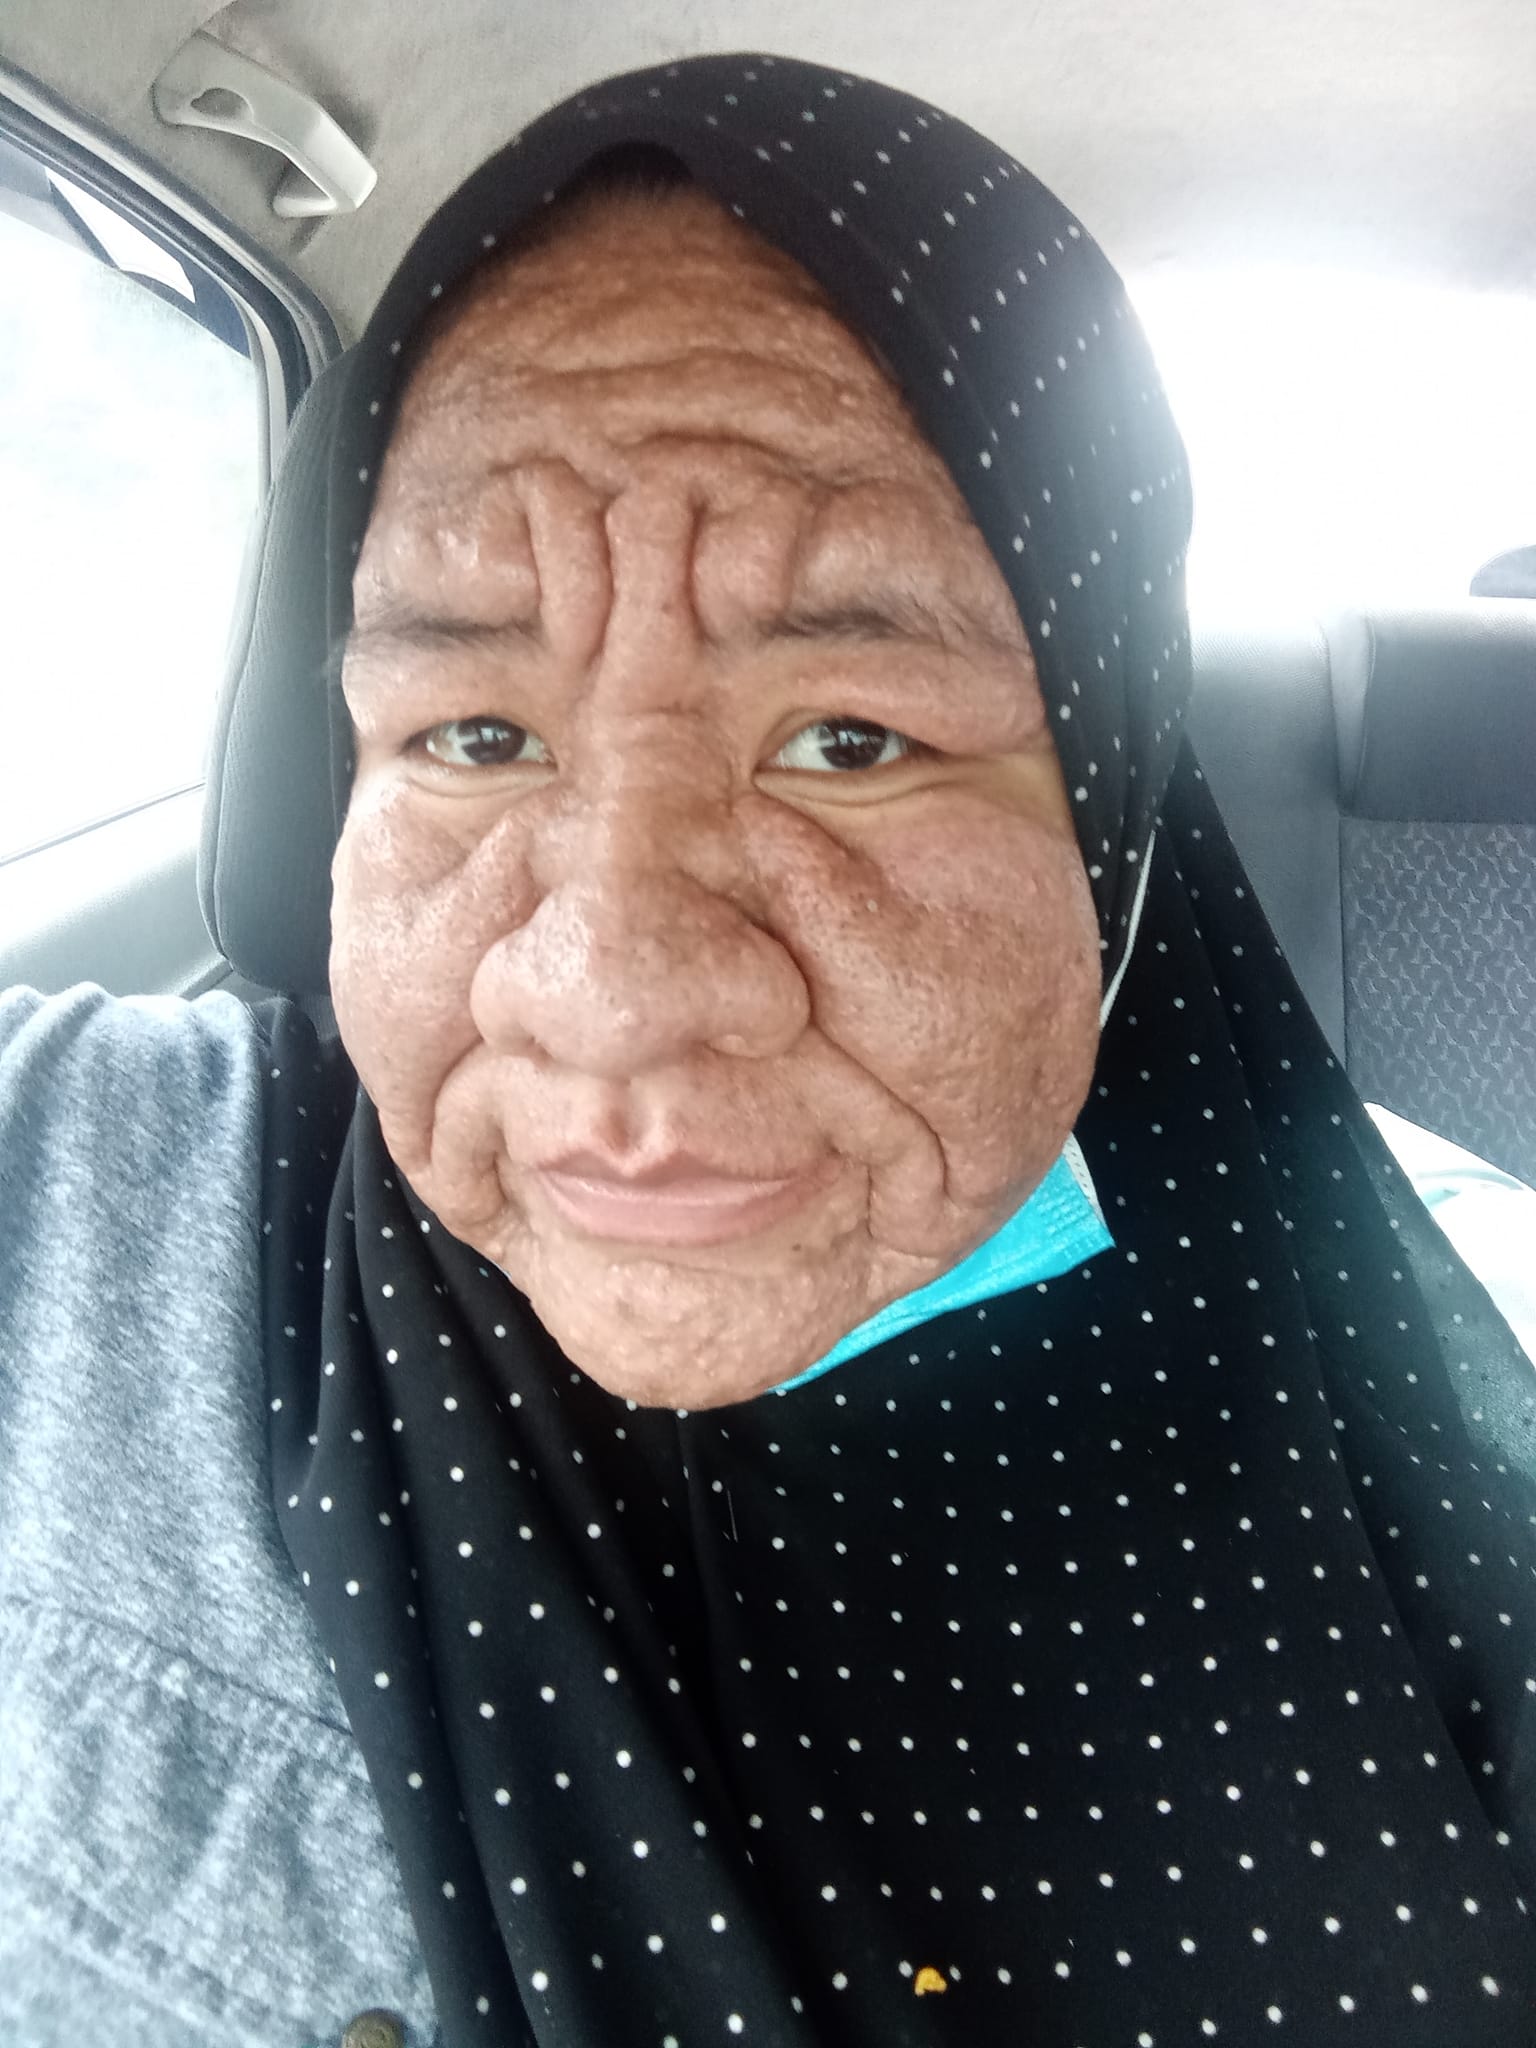 Nur Ain's skin appearing swollen and wrinkled during her pregnancy.